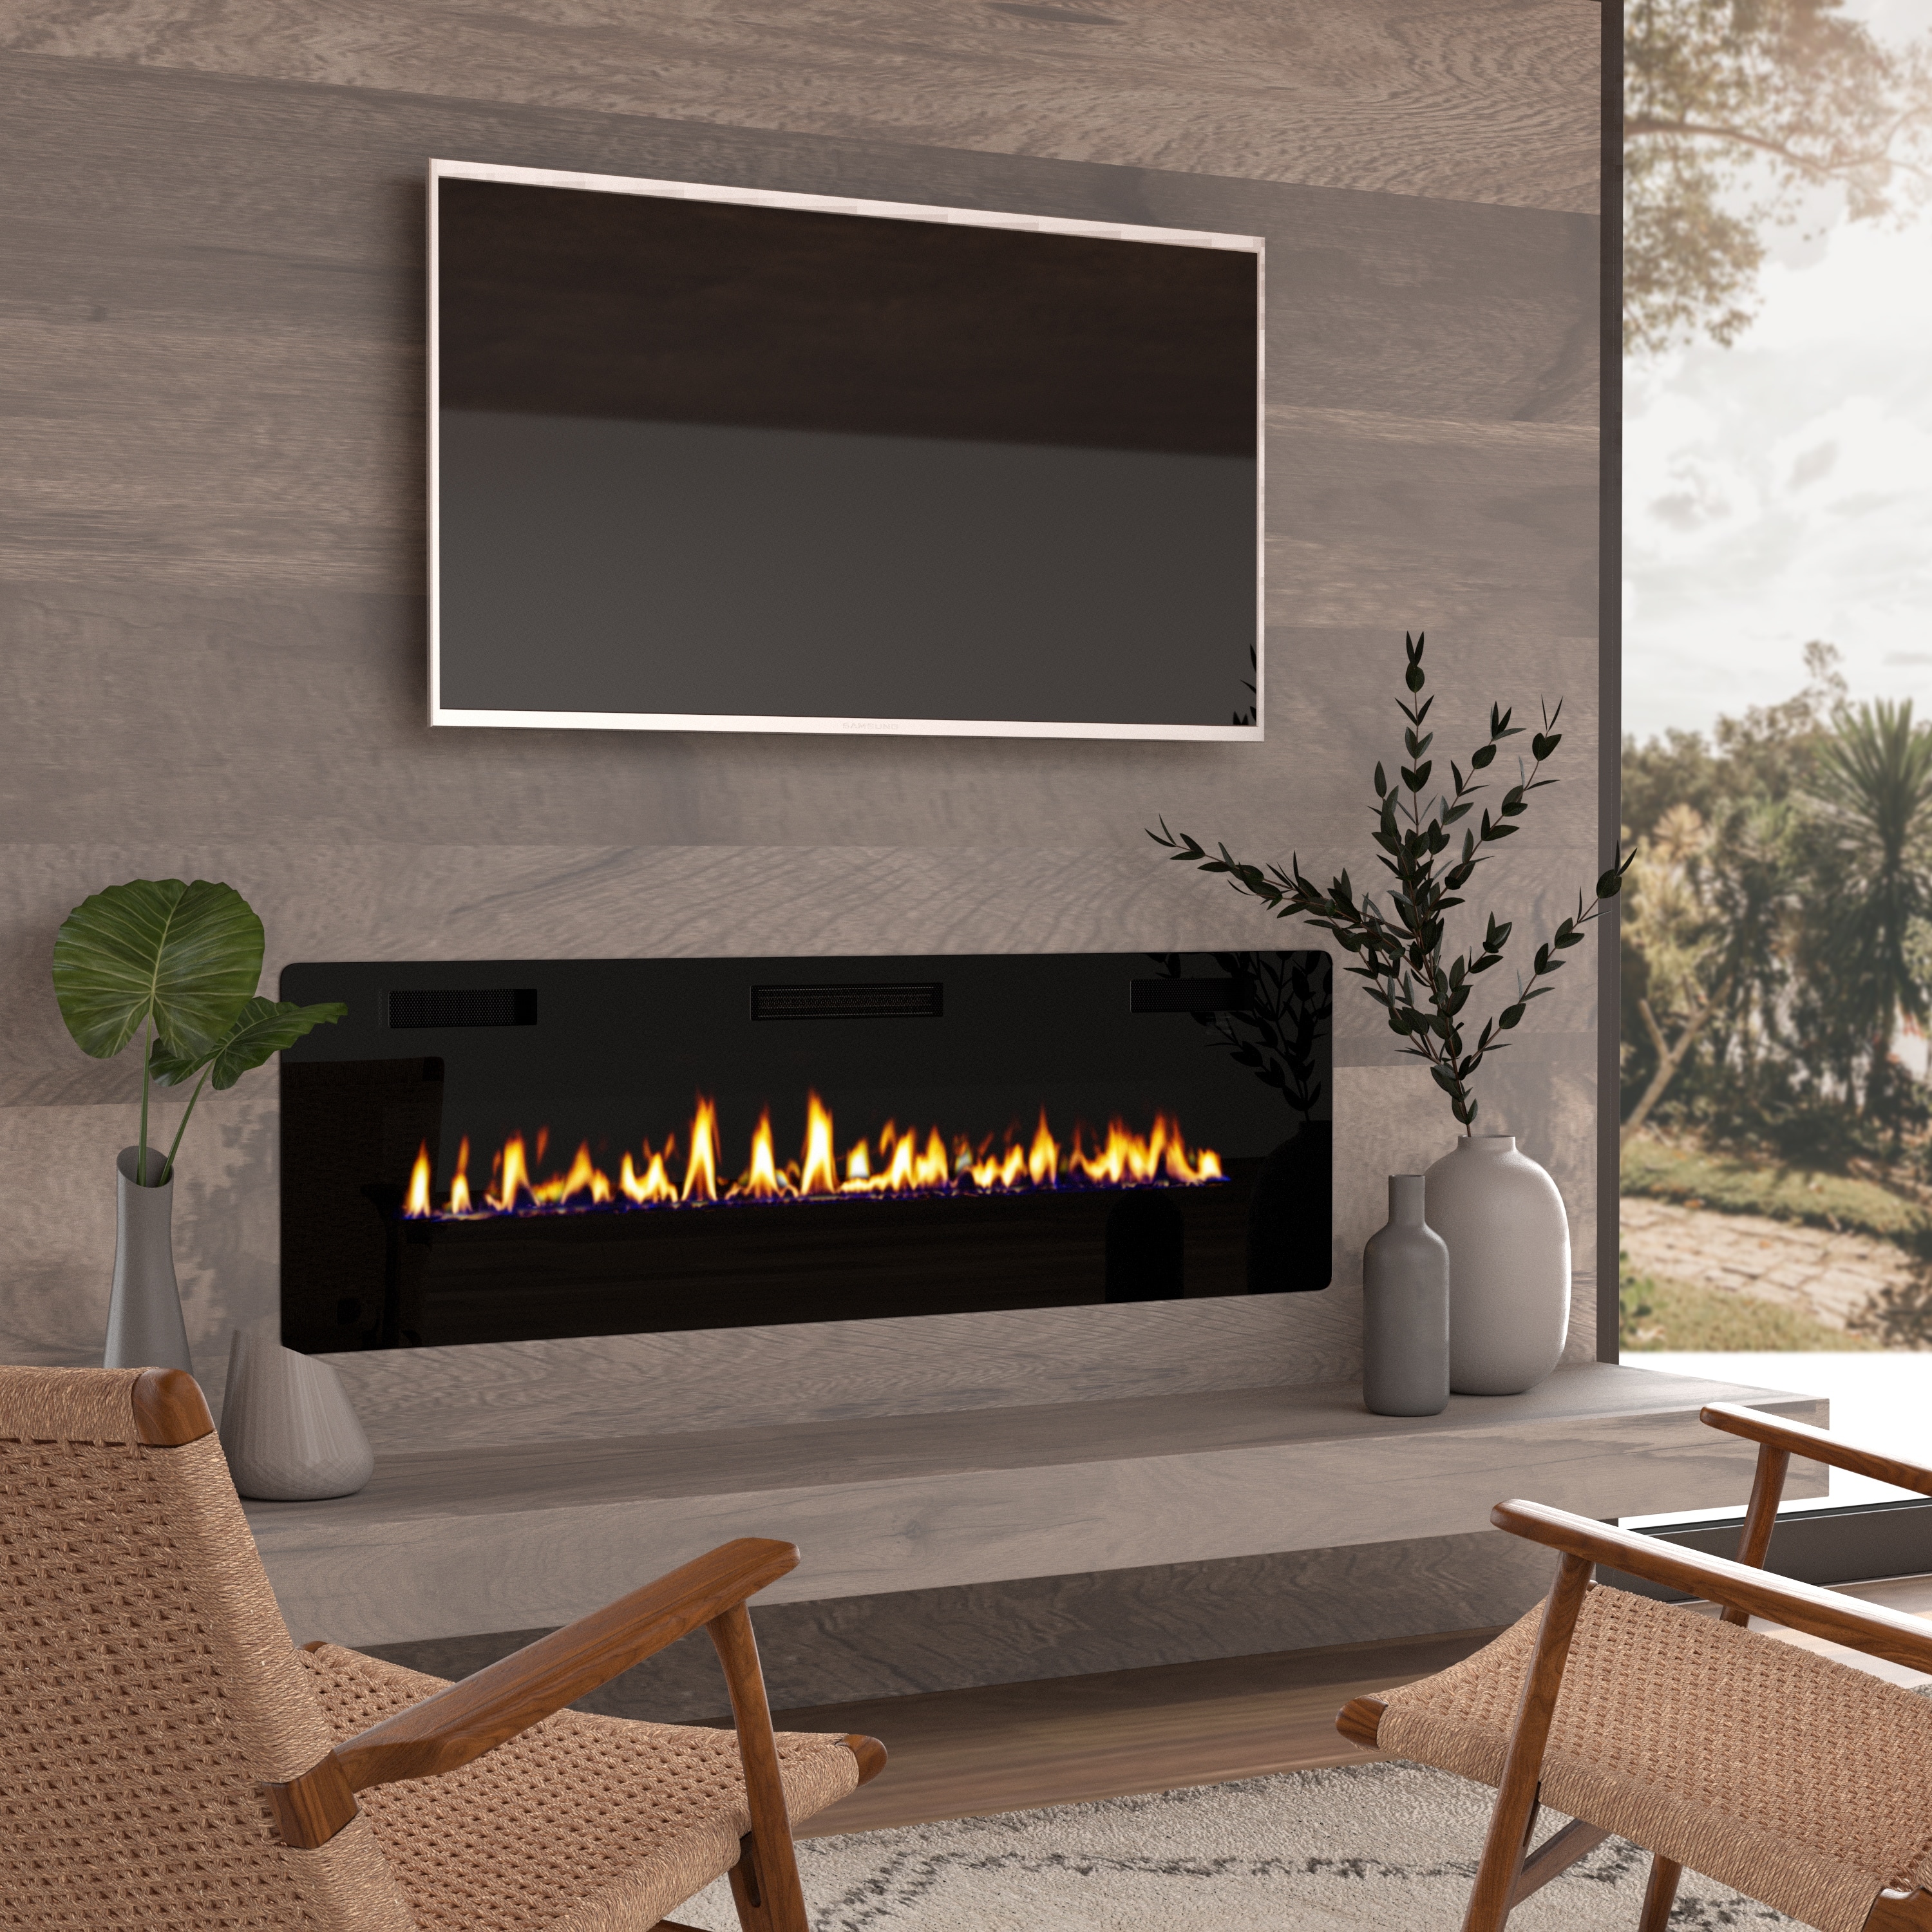 60inch Ultrathin Electric Fireplace Insert Overstock 31136093